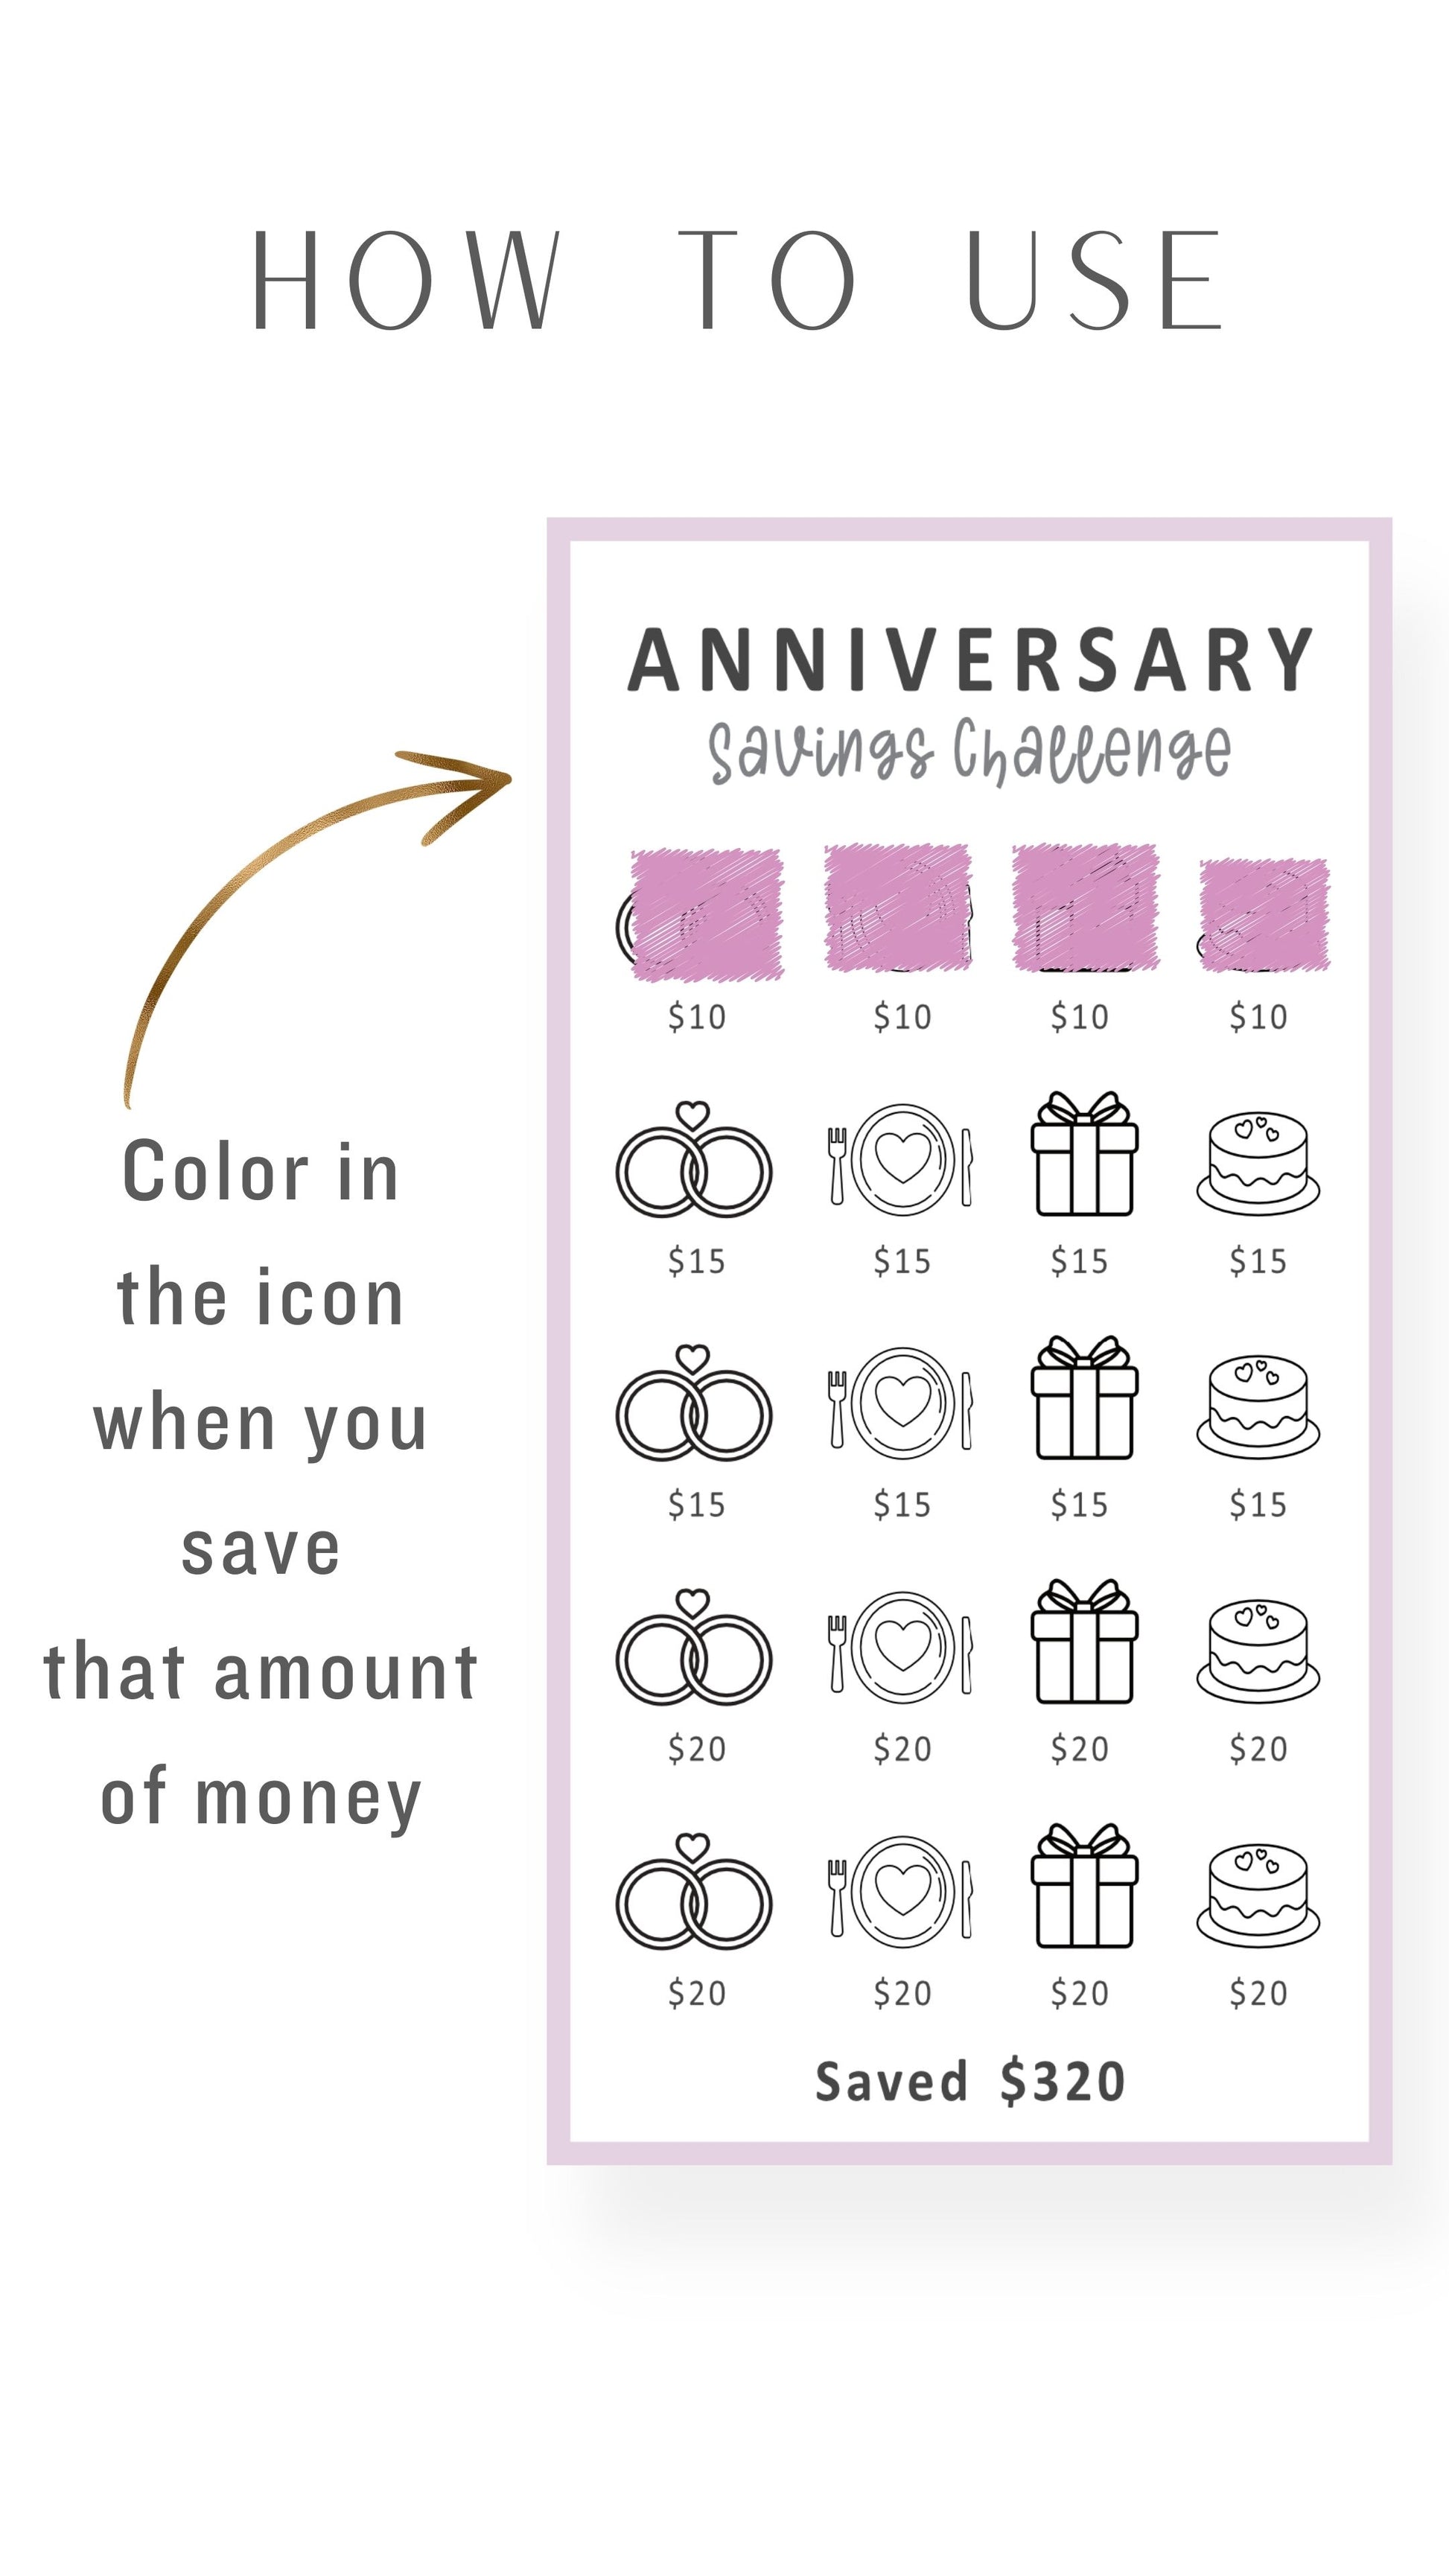 How to save money for anniversary